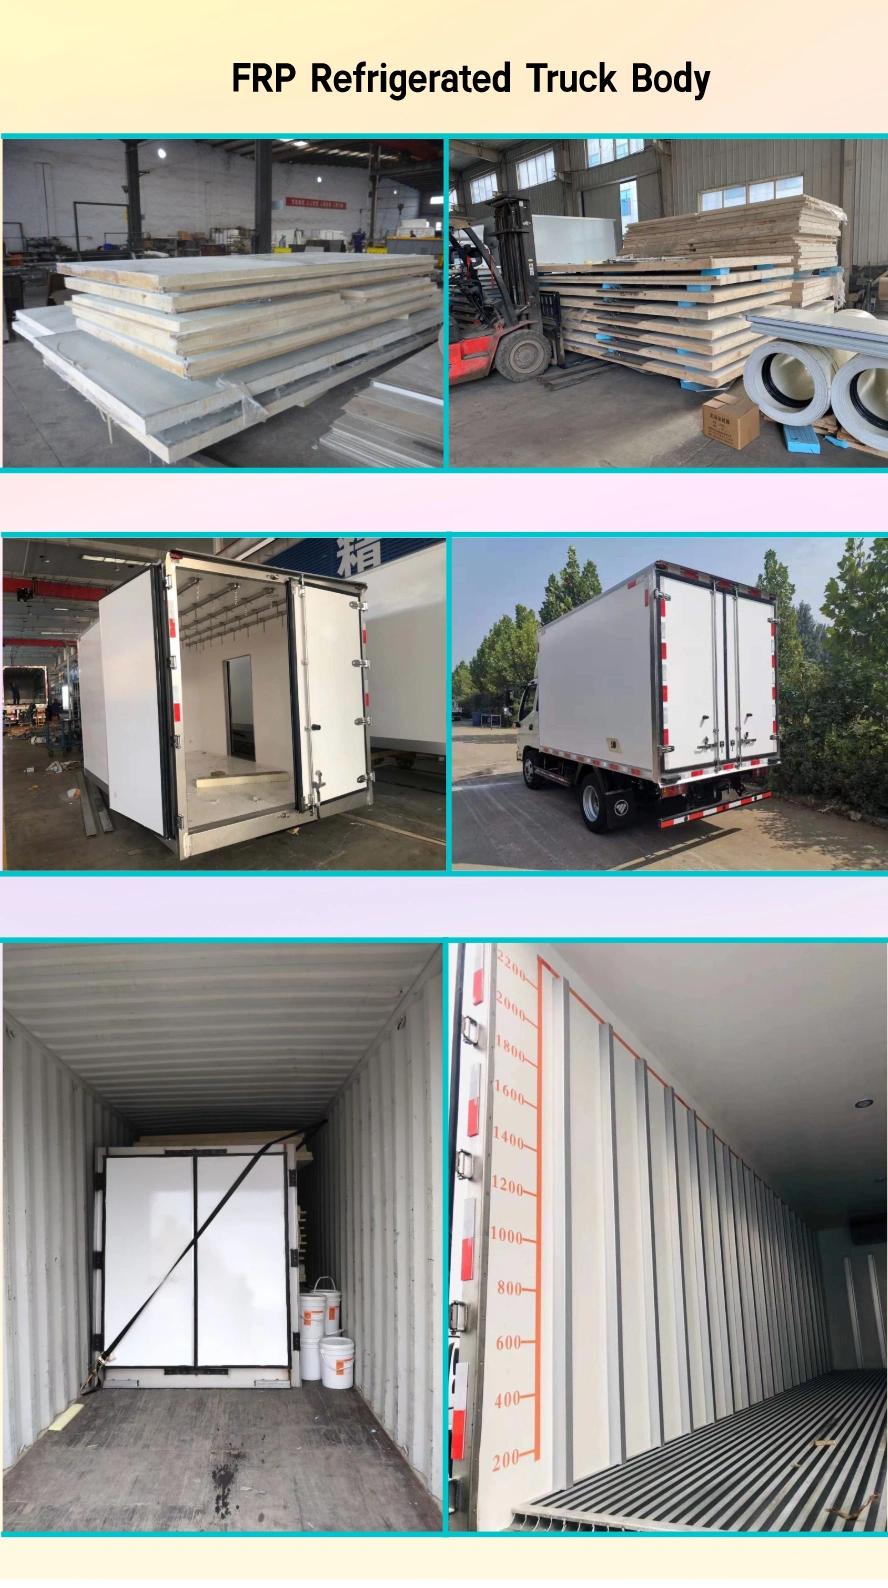 Bueno China New Bueno 3t 4t Cold Storage Truck Refrigerated Truck Body for Isuzu Hino Renault Fuso Nissan Refrigerated Truck